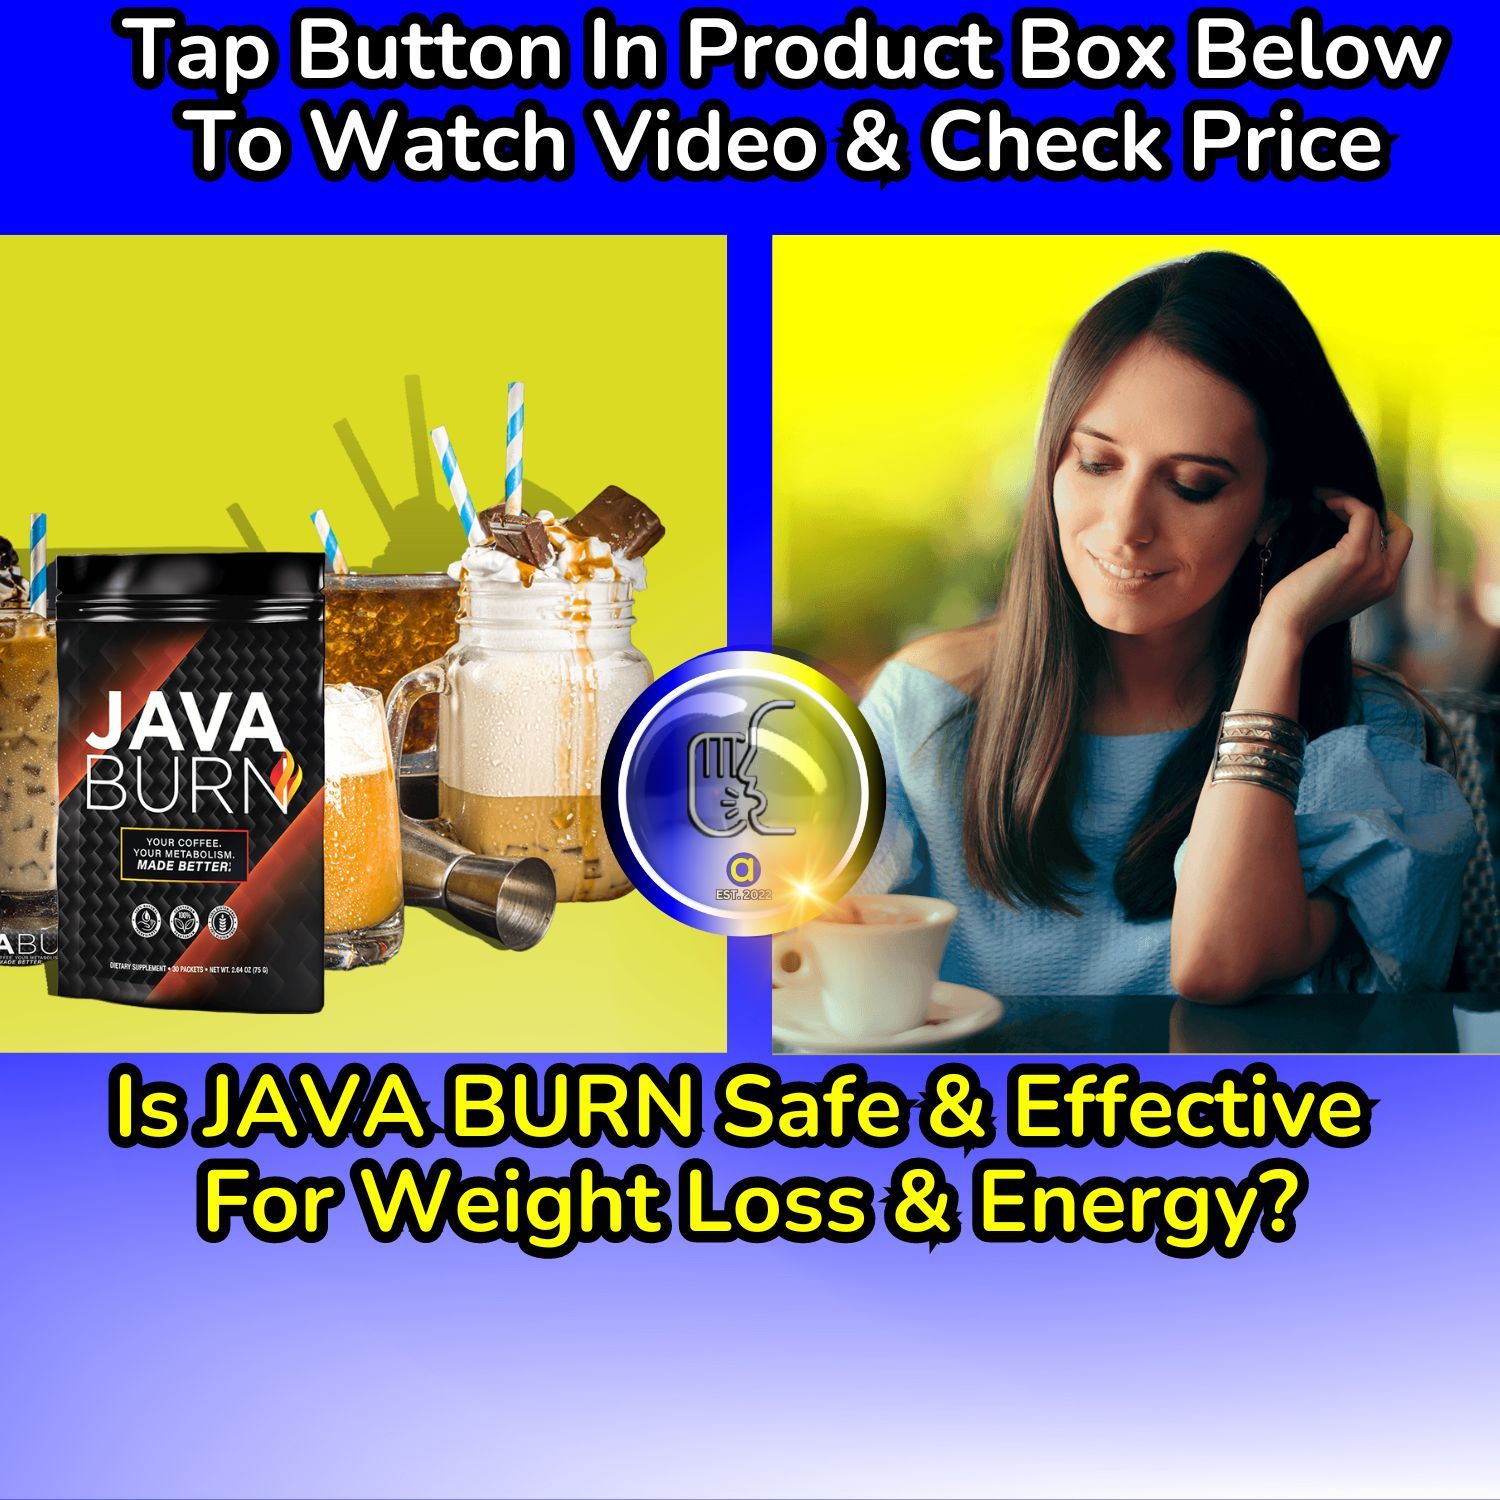 JAVA BURN, Your Coffee, Your Metabolism, MADE BETTER.